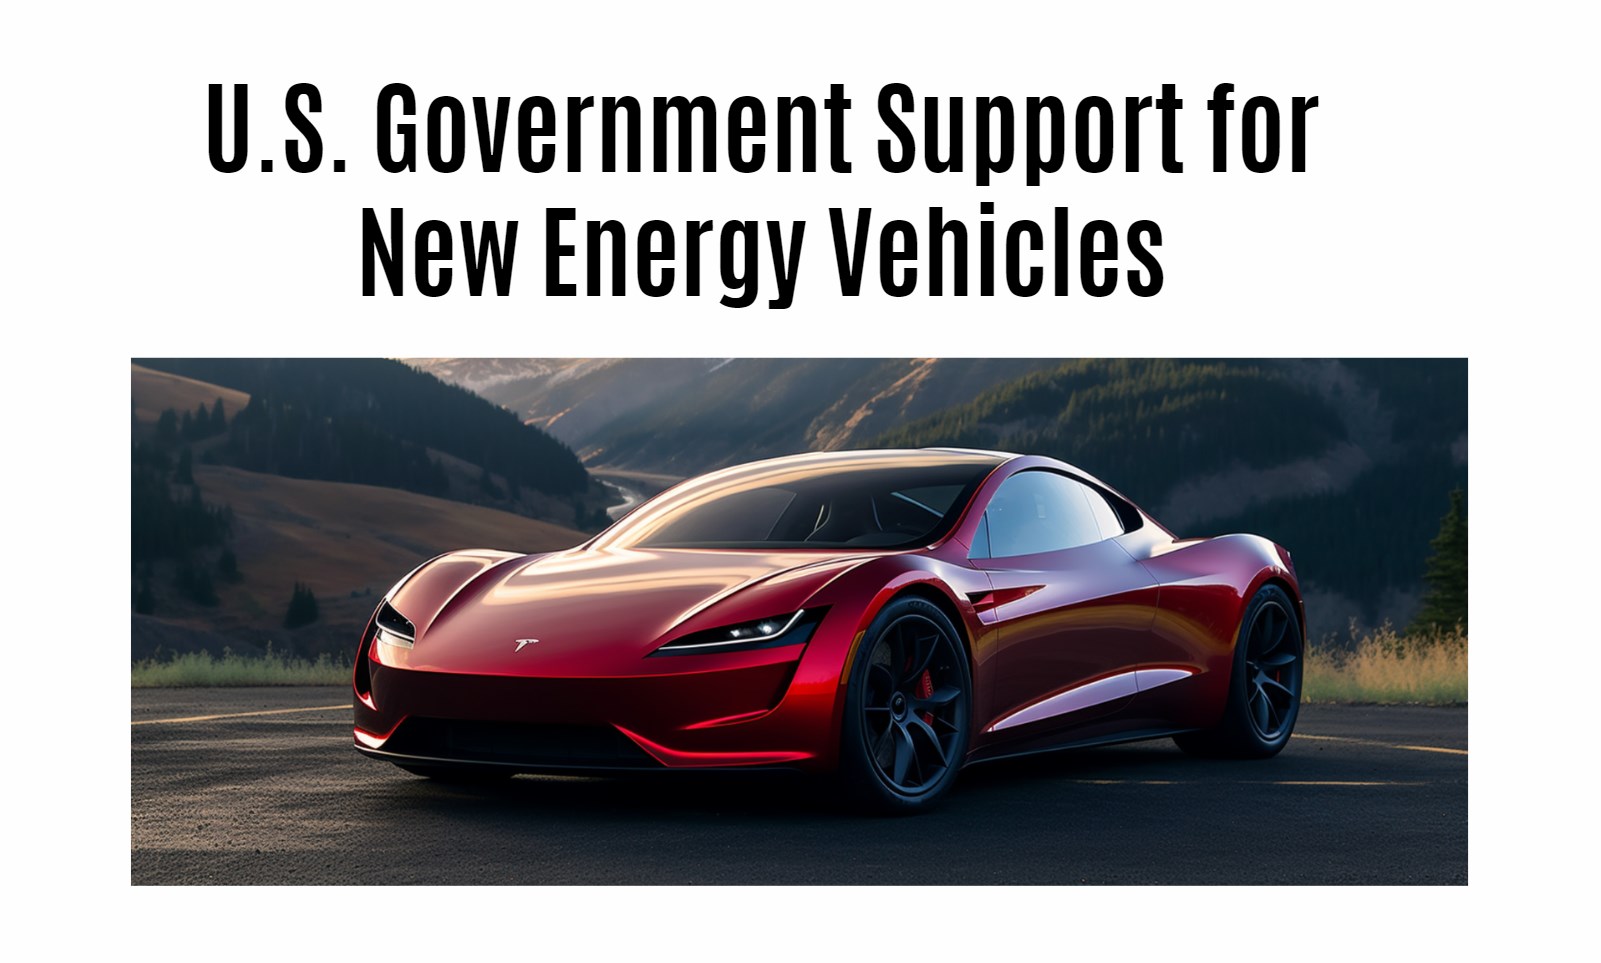 U.S. Government Support for New Energy Vehicles. tesla car